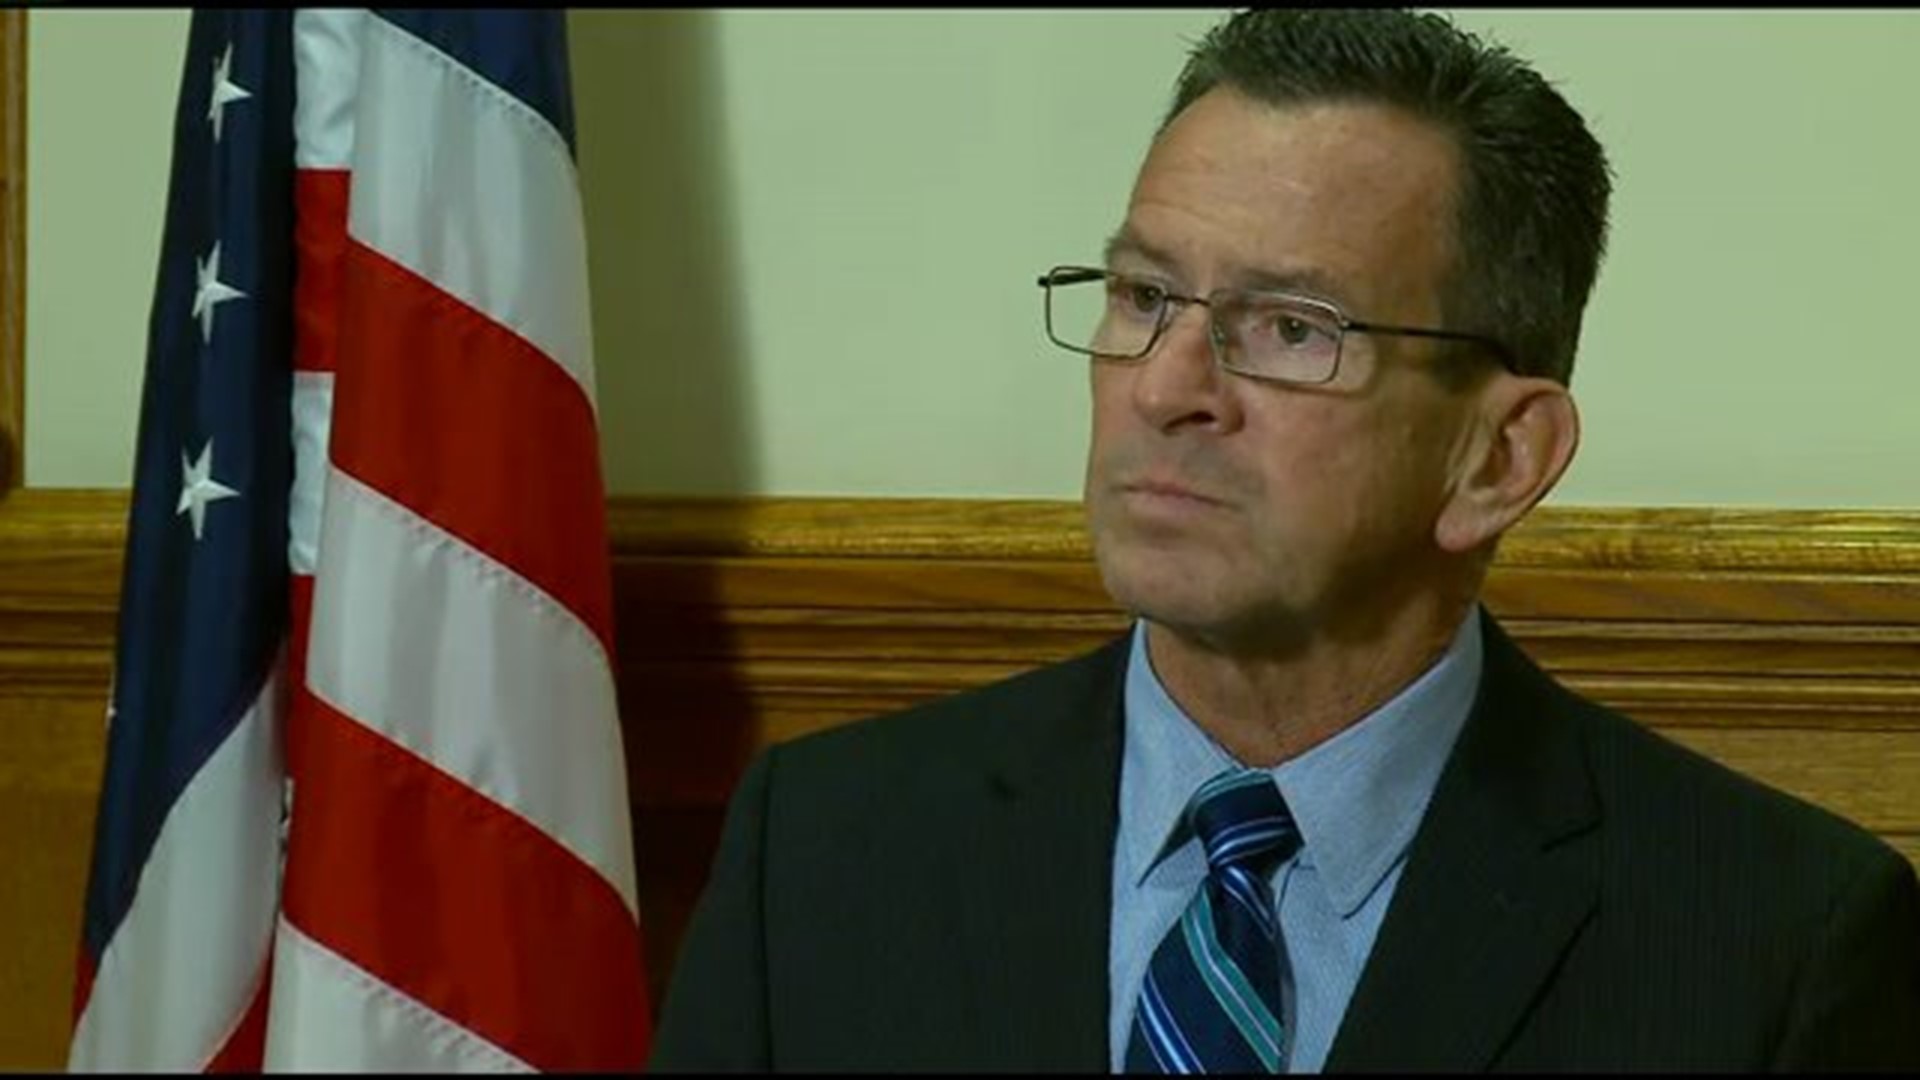 Gov. Dan Malloy holds press conference to discuss Syrian refugee family`s arrival